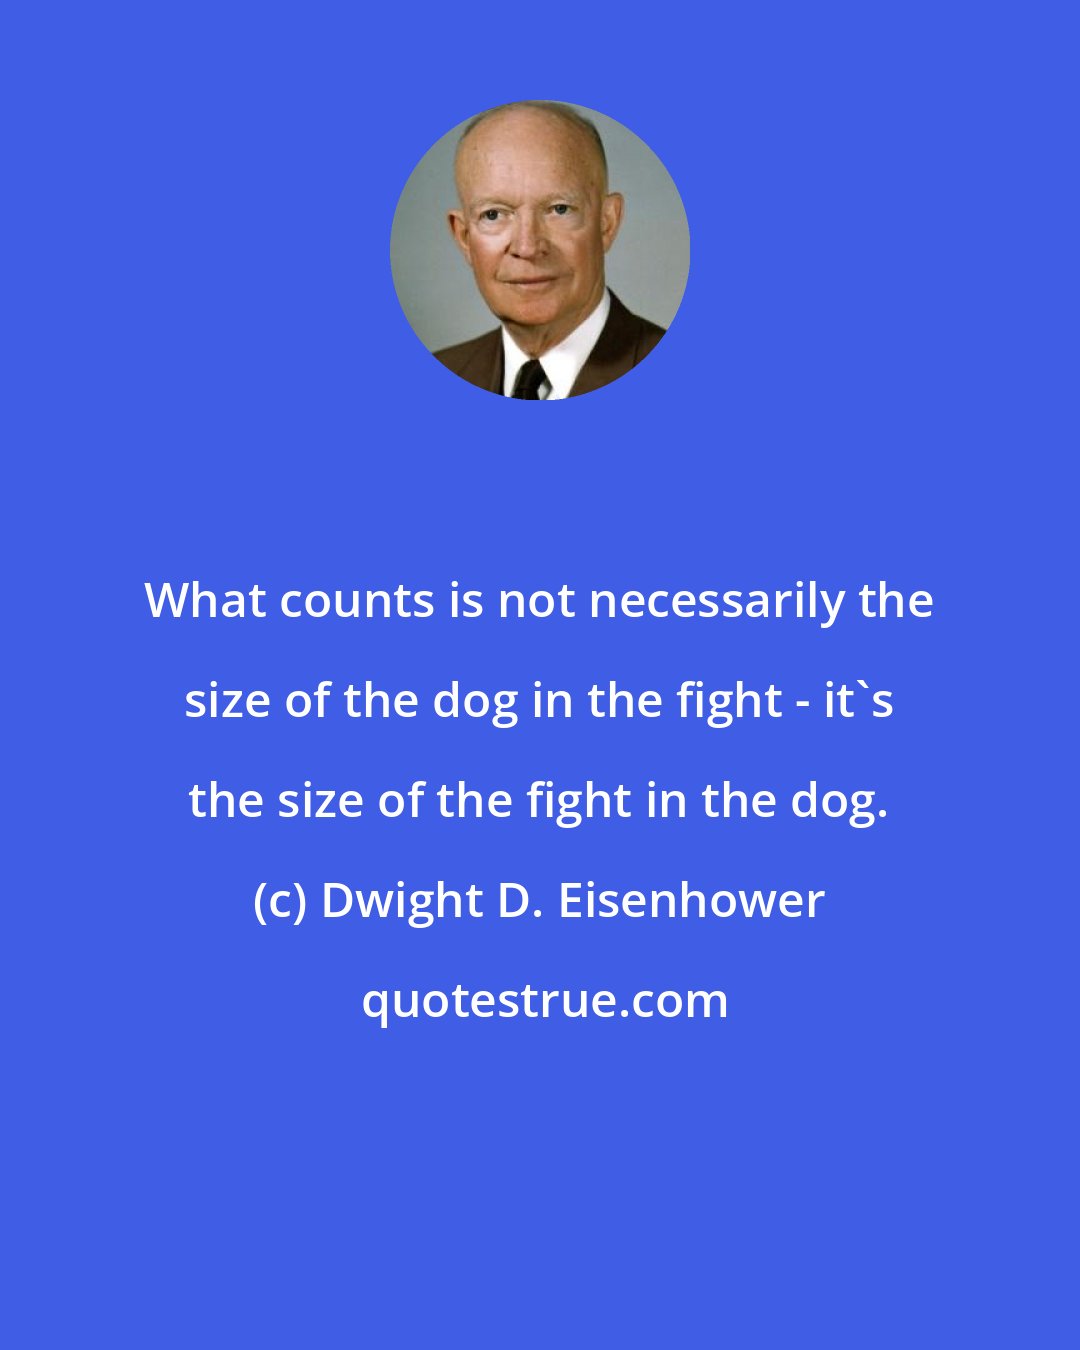 Dwight D. Eisenhower: What counts is not necessarily the size of the dog in the fight - it's the size of the fight in the dog.